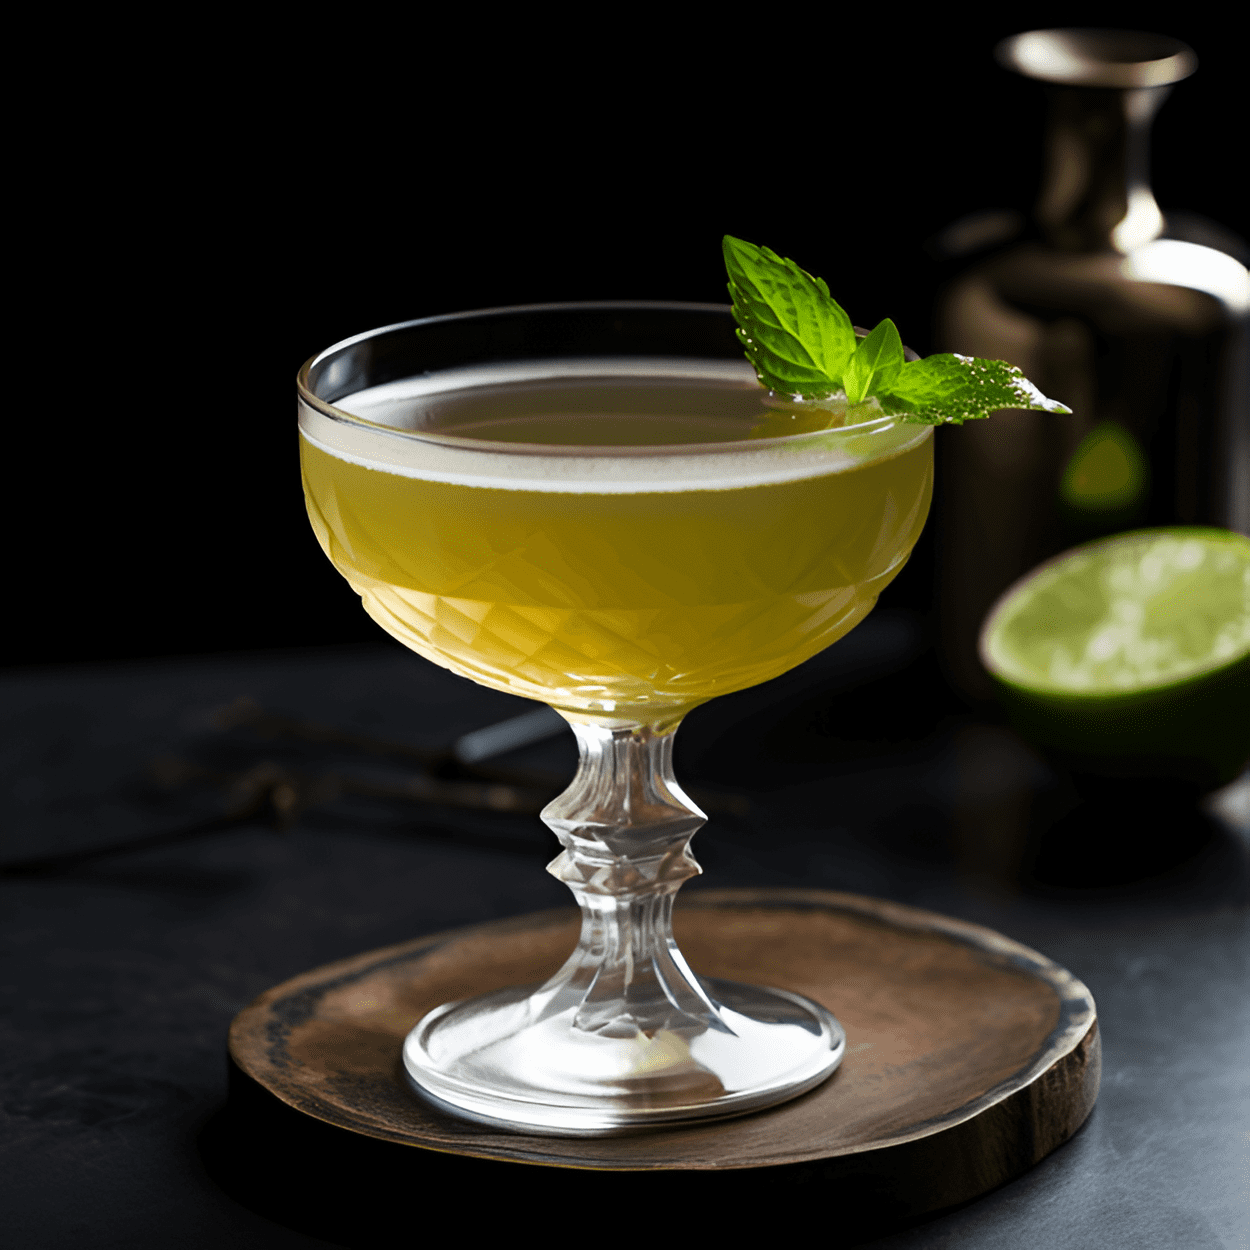 Quarter Deck Cocktail Recipe - The Quarter Deck cocktail offers a harmonious blend of sweet, sour, and slightly bitter flavors. The sherry adds a rich, nutty undertone, while the lime juice provides a refreshing citrus tang. The overall taste is smooth, well-rounded, and satisfying.